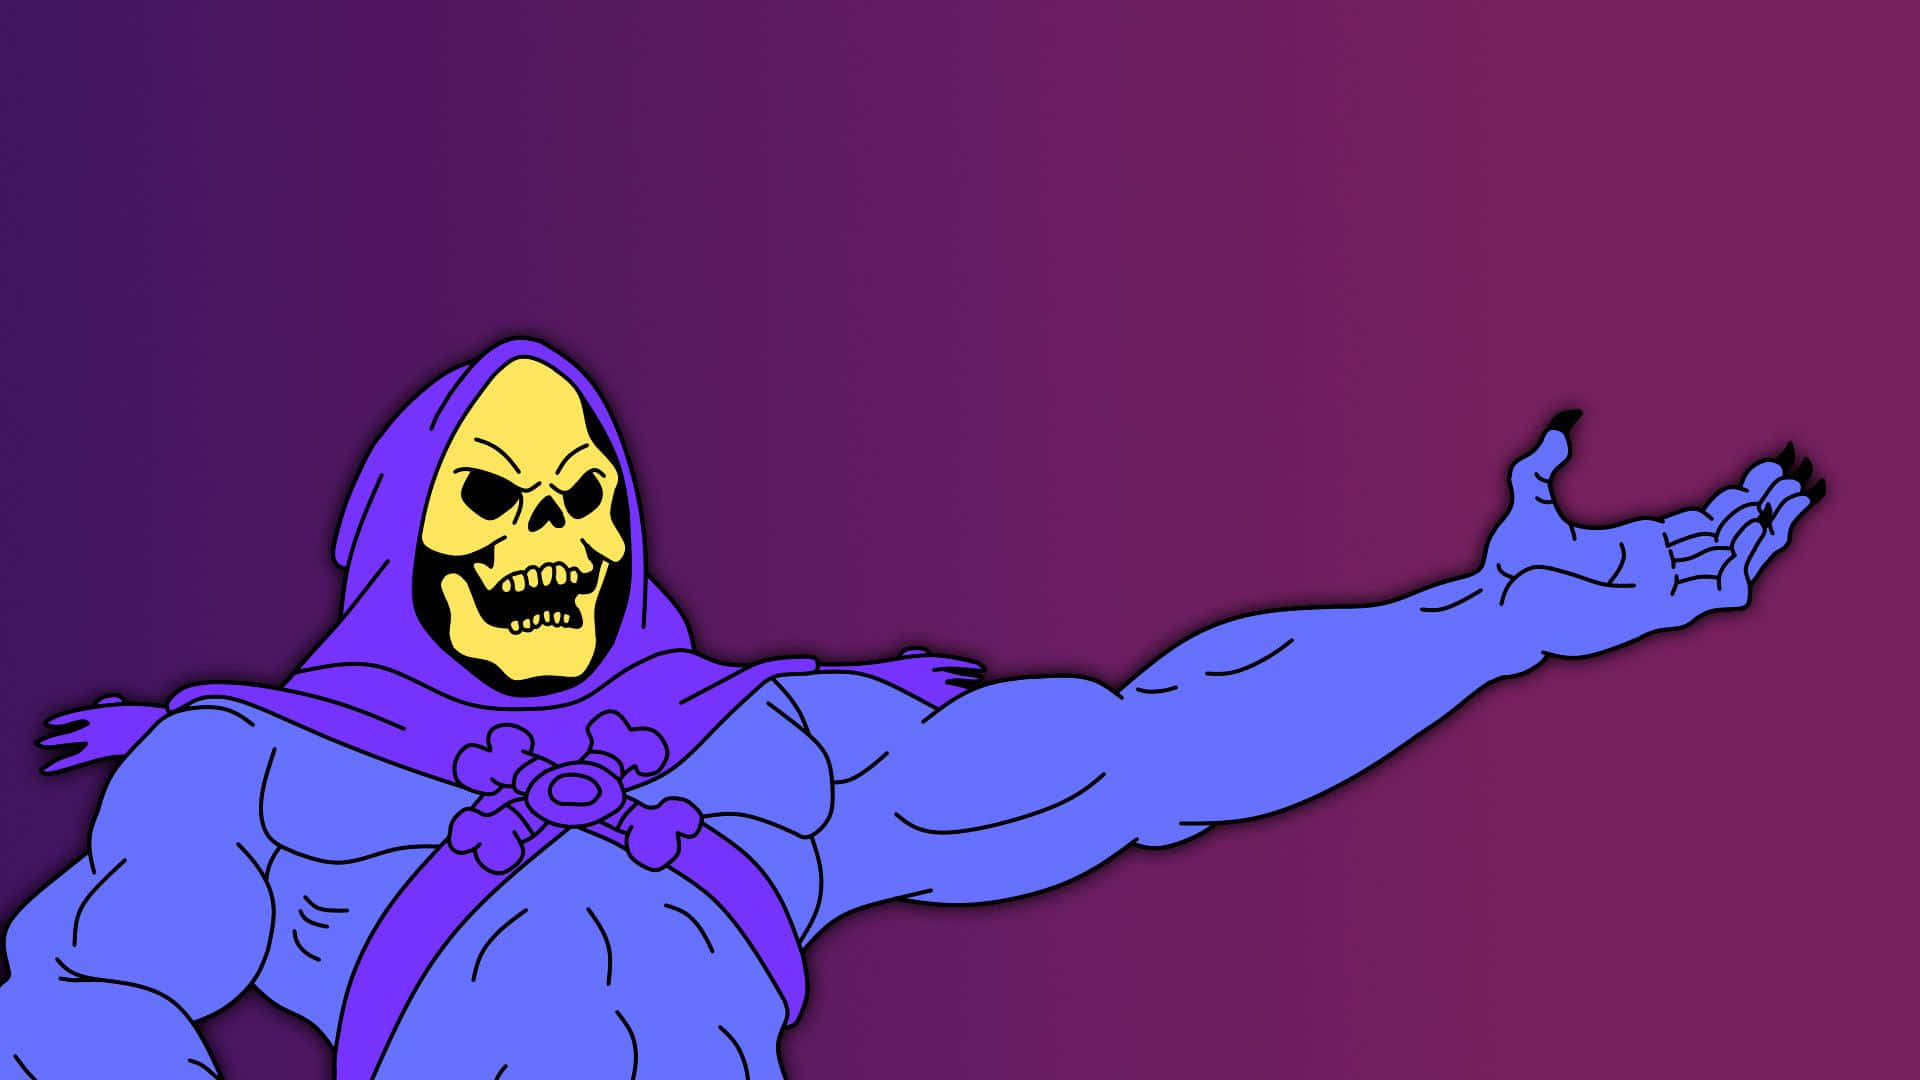 A Cartoon Character With A Purple And Blue Background